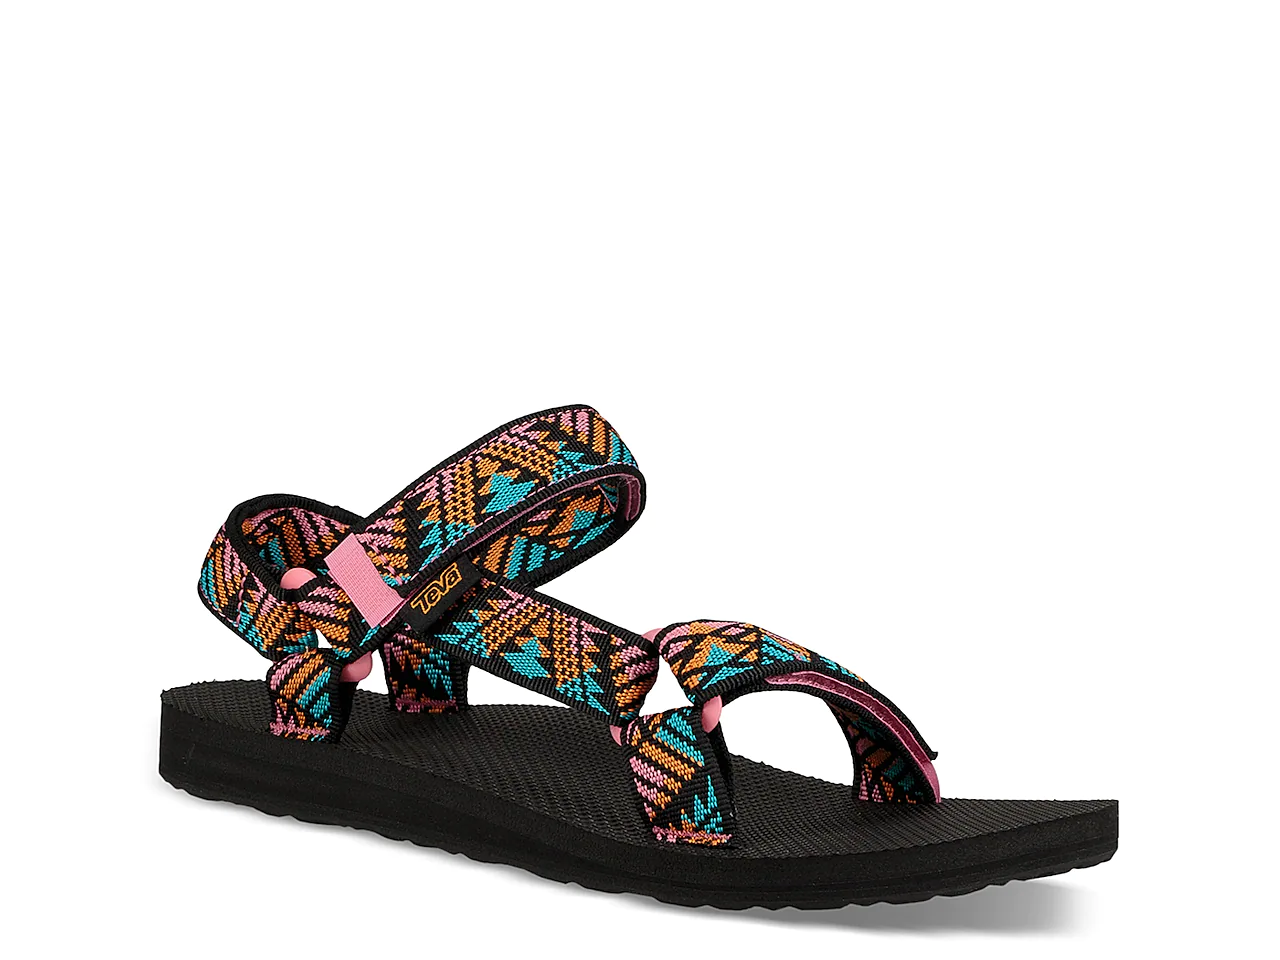 A strappy sandal with multi-colored print